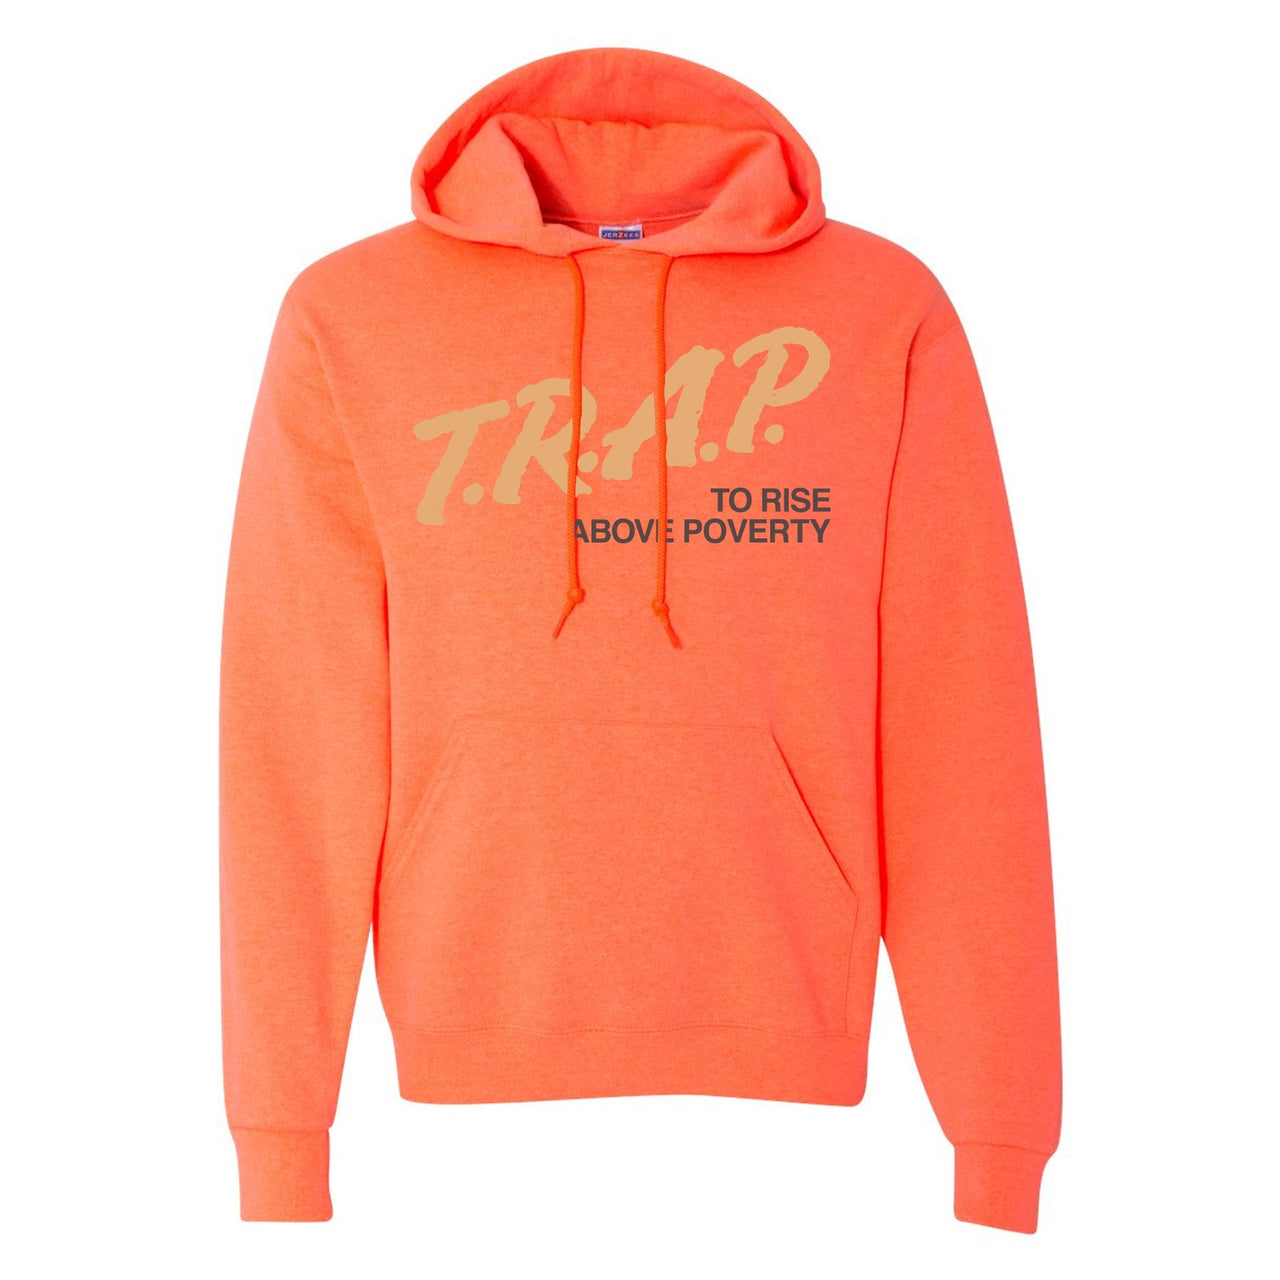 Clay v2 350s Hoodie | Trap To Rise Above Poverty, Heathered Coral